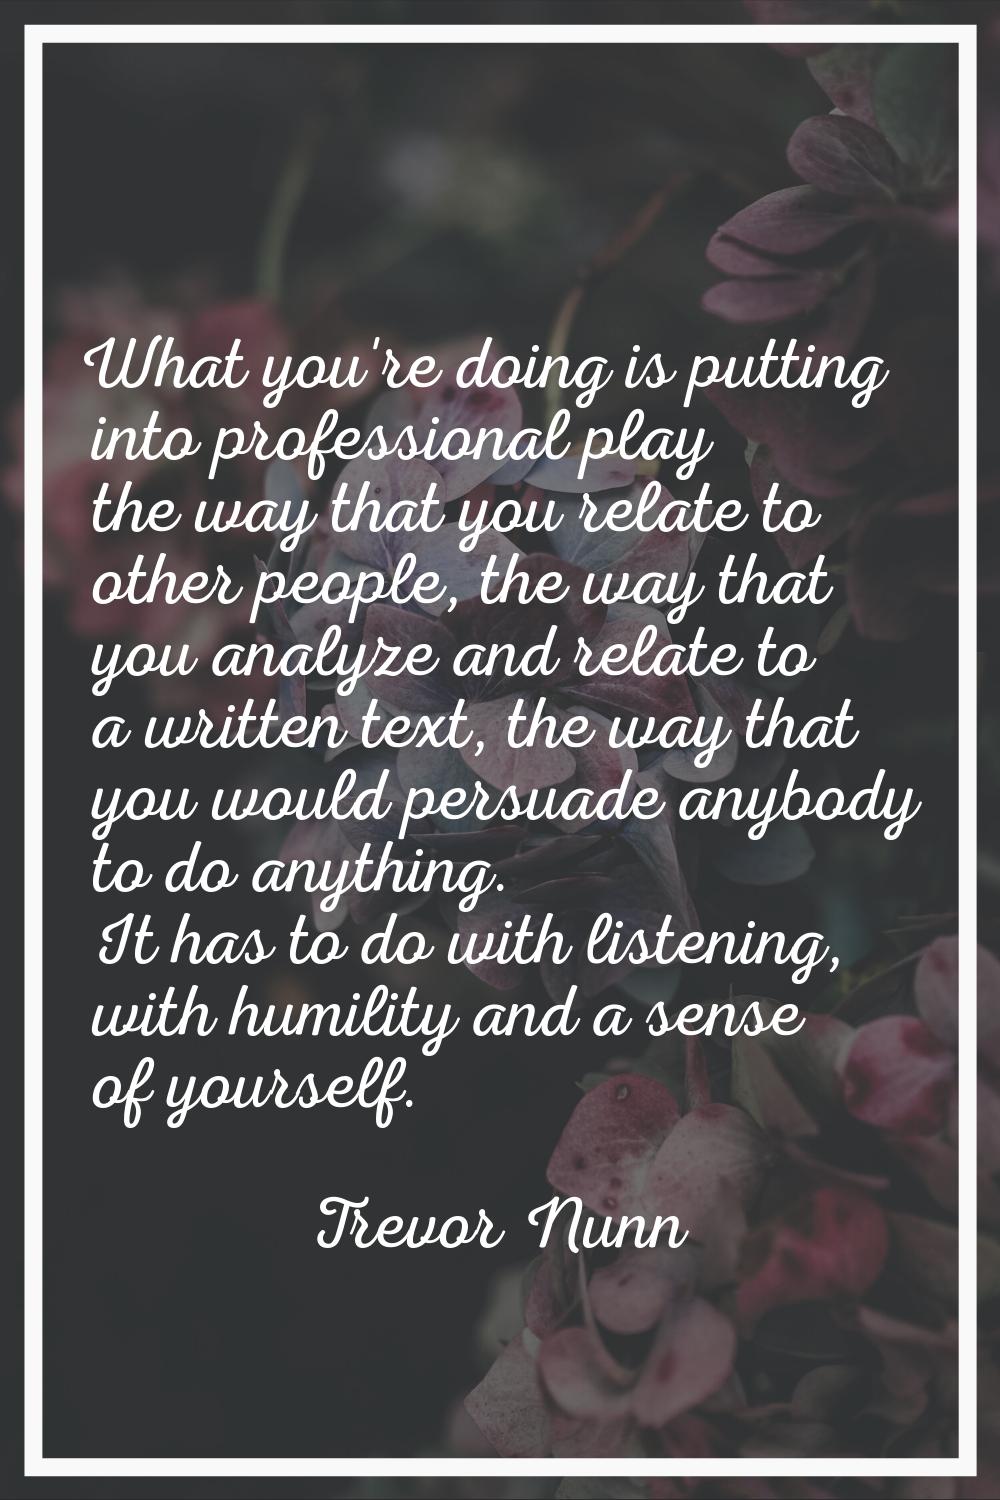 What you're doing is putting into professional play the way that you relate to other people, the wa